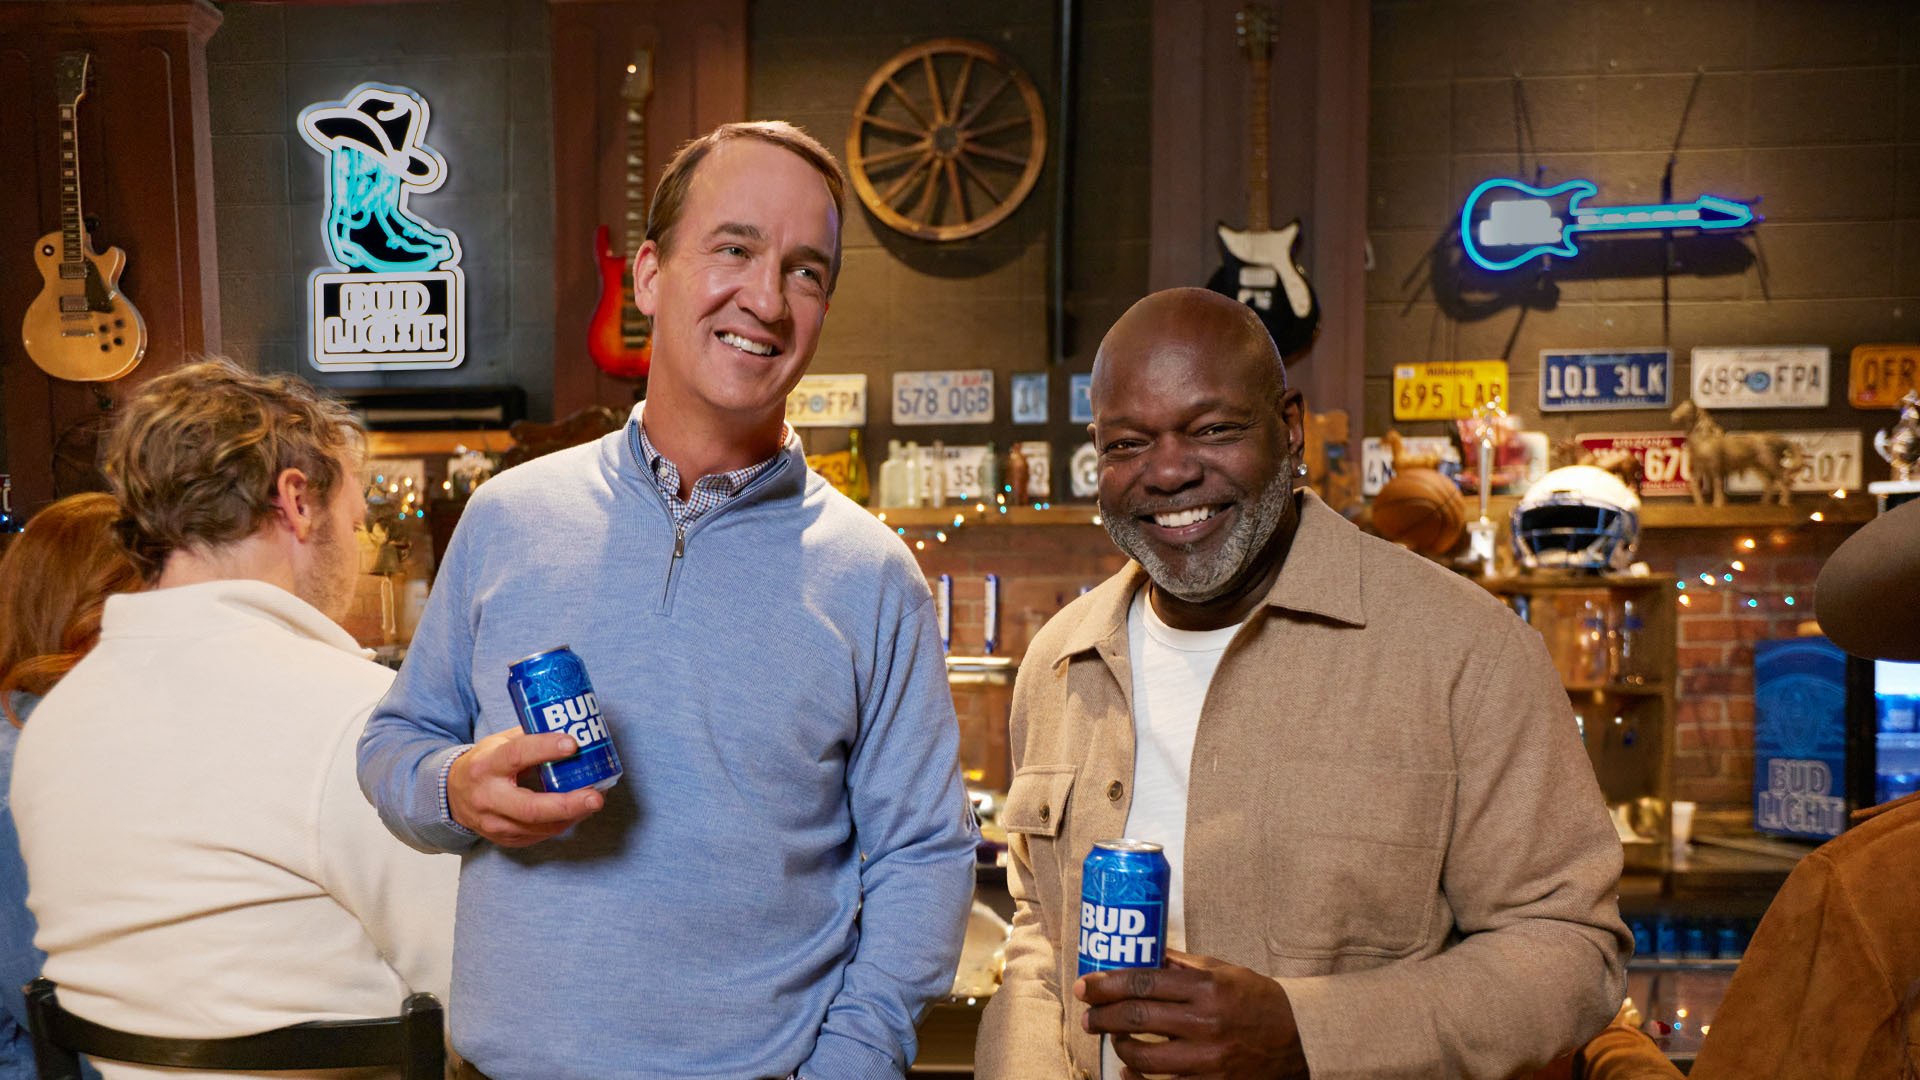 Bud Light Teams Up with NFL Legends Peyton Manning and Emmitt Smith to Kickoff Biggest Sponsored Super Bowl Ticket Giveaway Ever with Brand New Ad